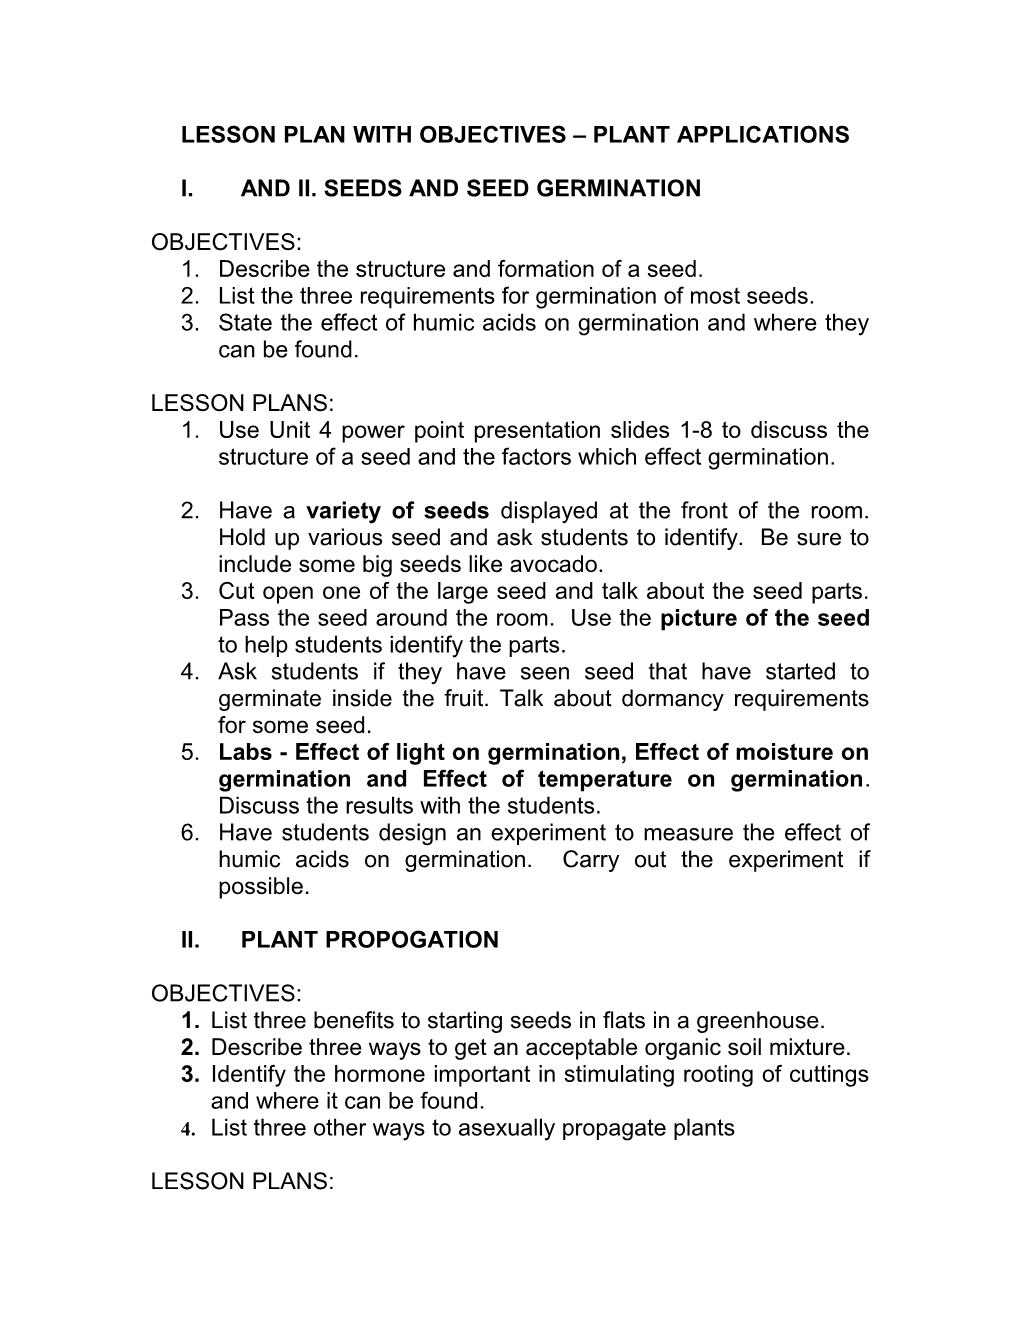 Objectives and Lesson Plan Unit 4 Plant Applications